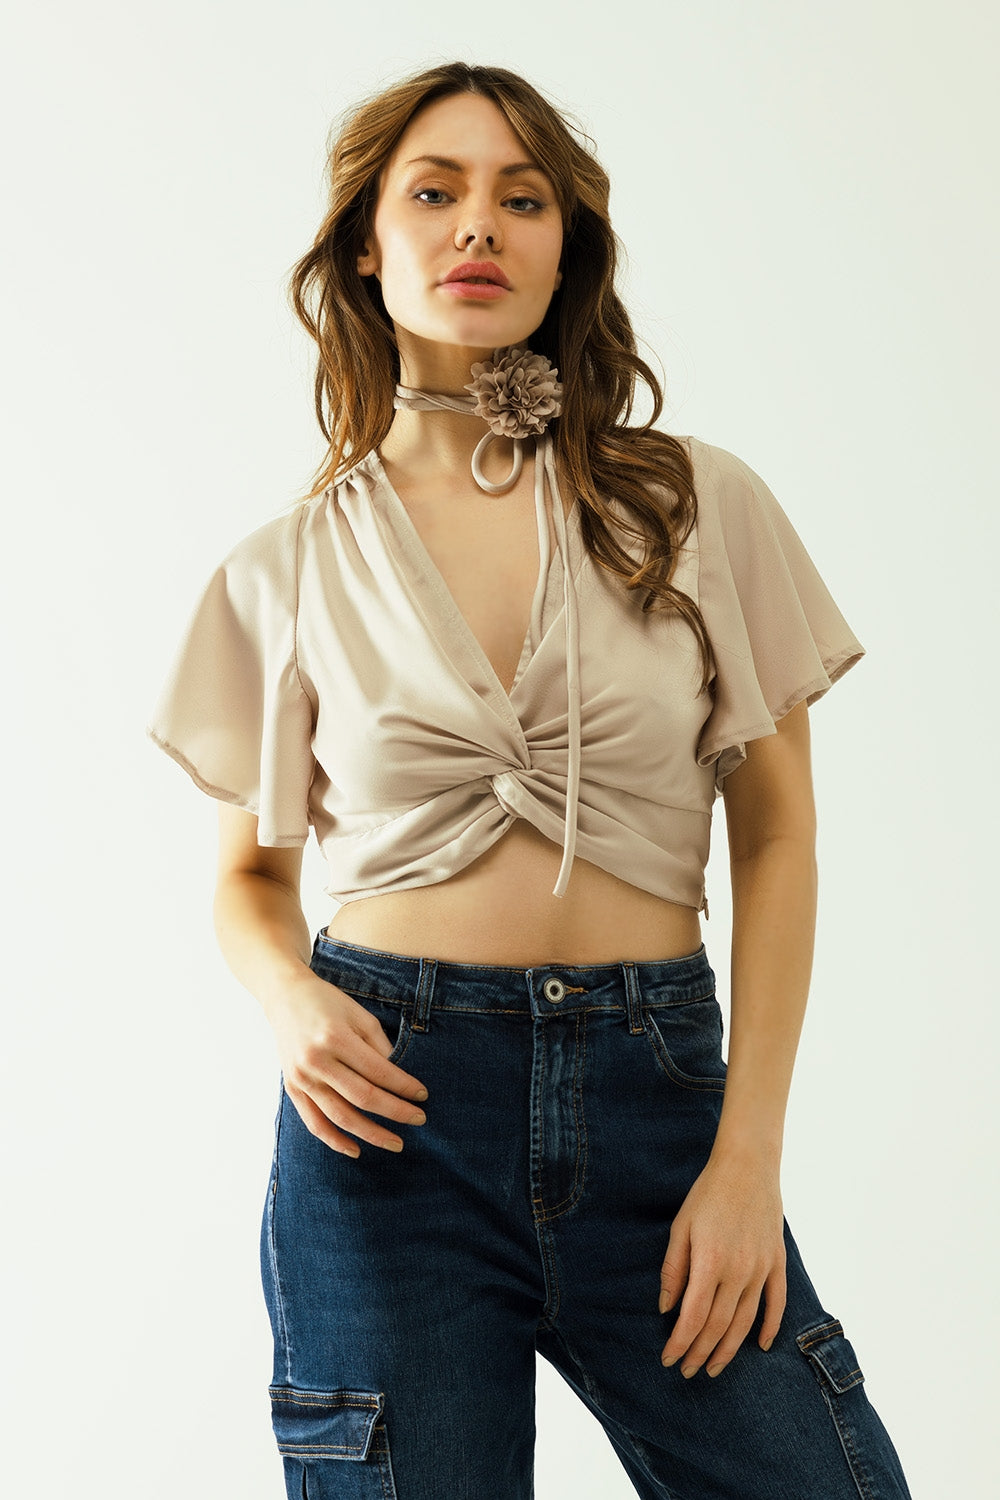 Q2 Beige V-neck crop top with short sleeves and a flower detail on the neck